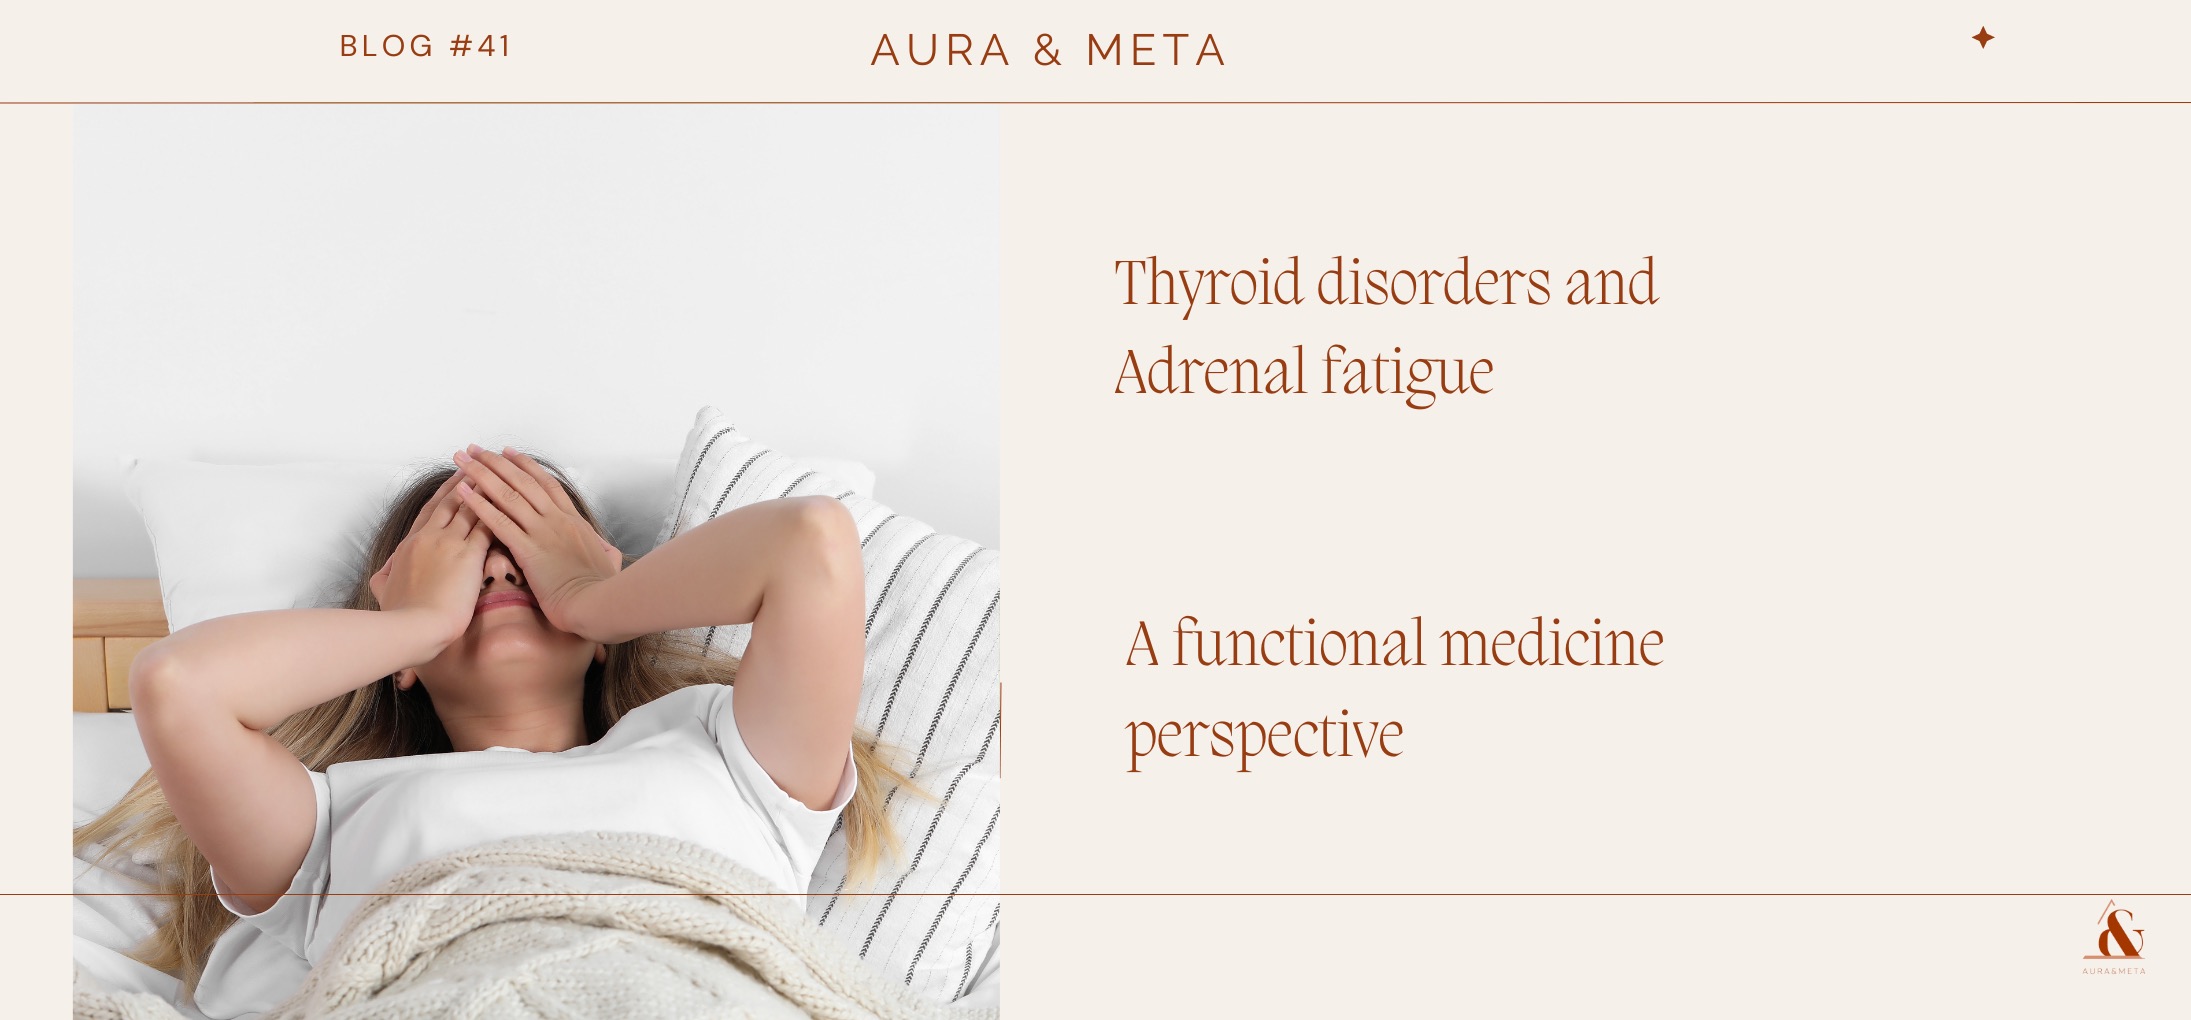 Managing Thyroid Disorders and Adrenal Fatigue in Women with Functional Medicine